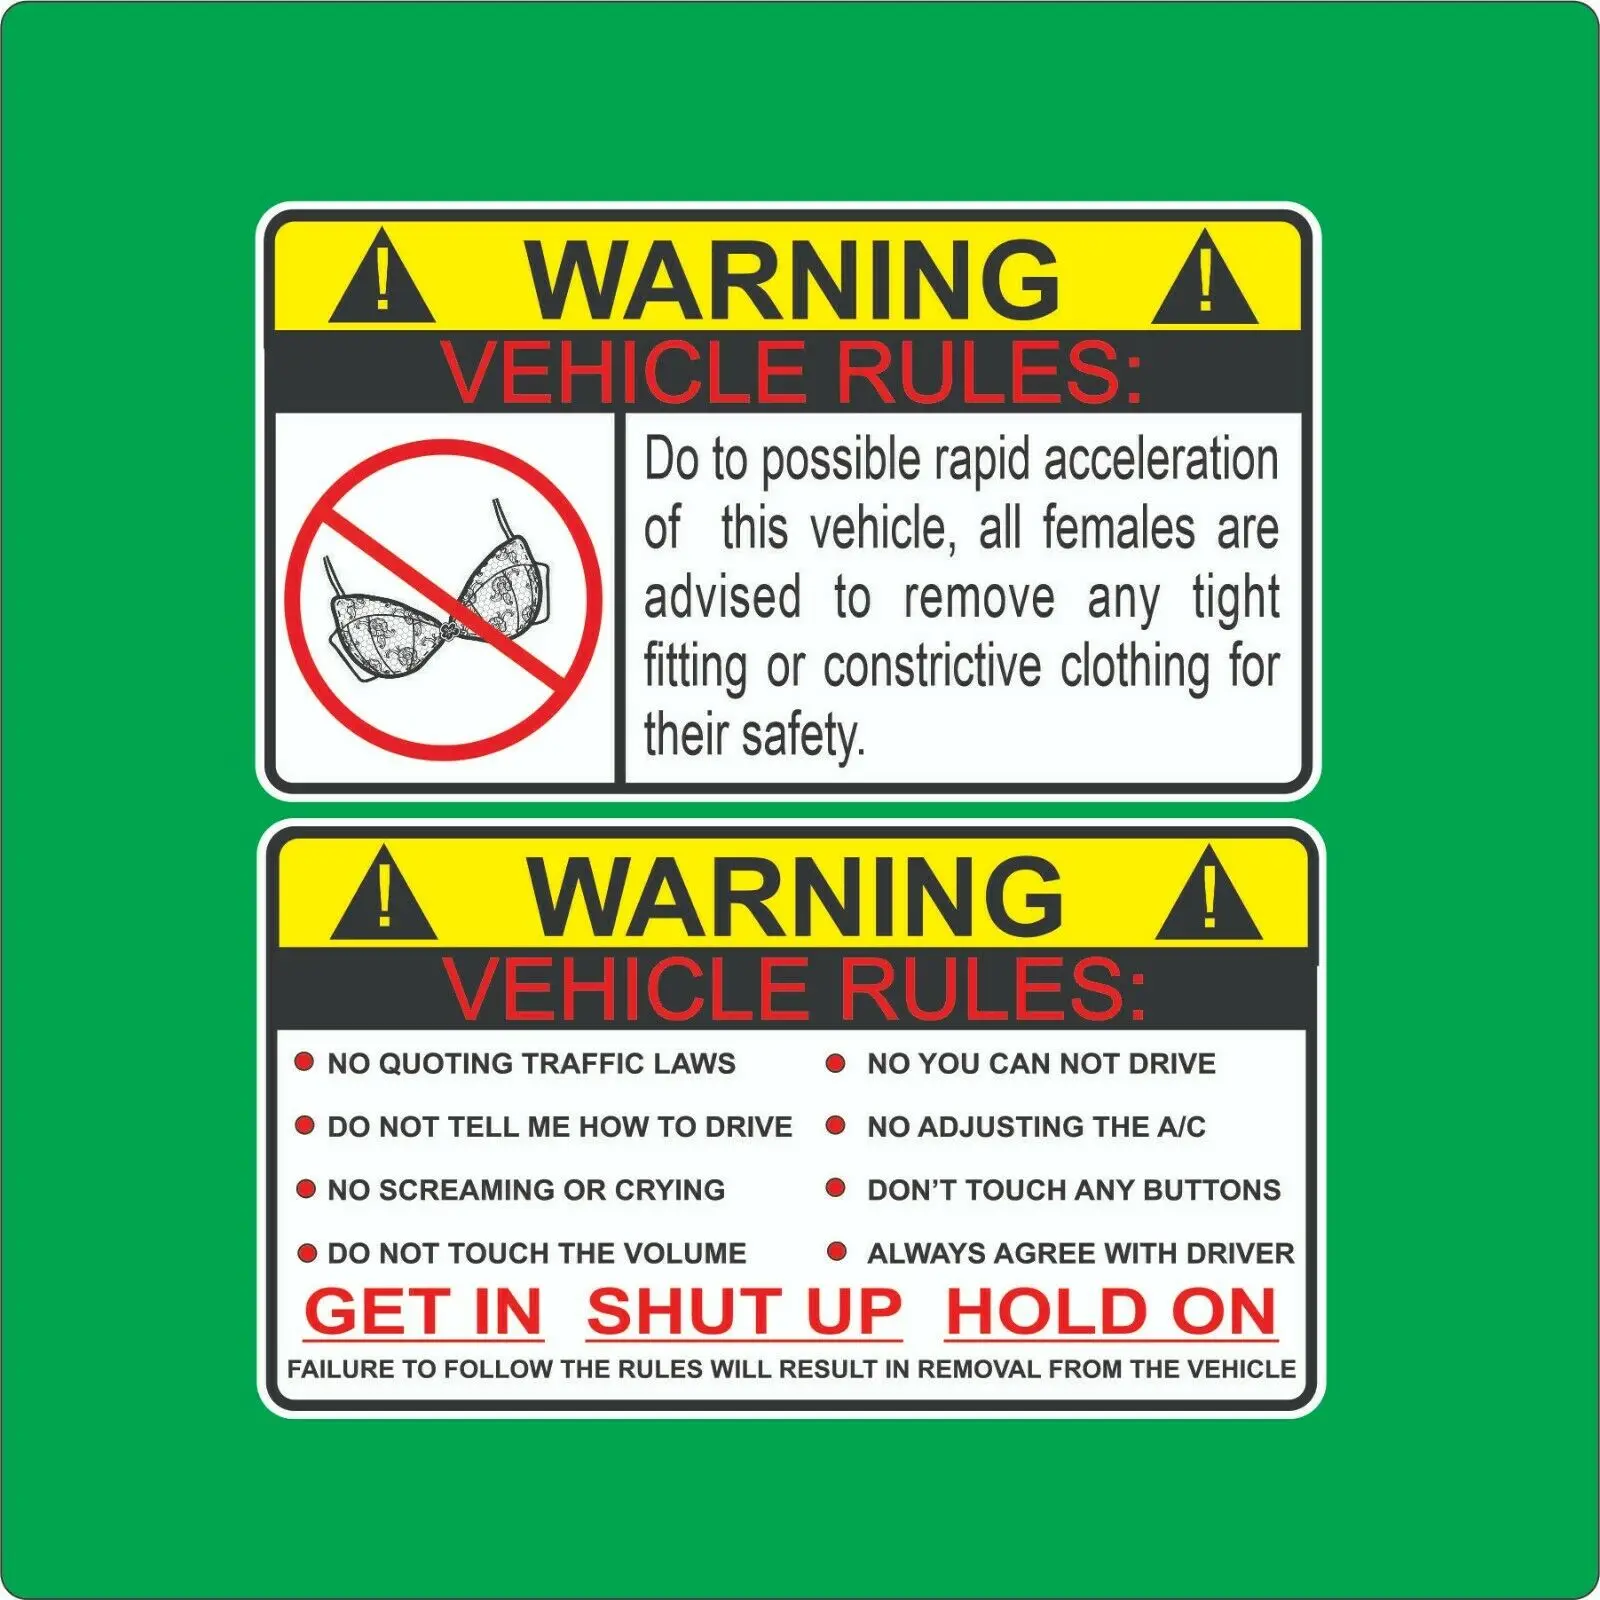 

Warning Decals 2 Vehicle Rules Funny Sticker Car Truck Decal No Bra Warning JDM Auto Fits Honda PVC Vinyl Reflective Stickers